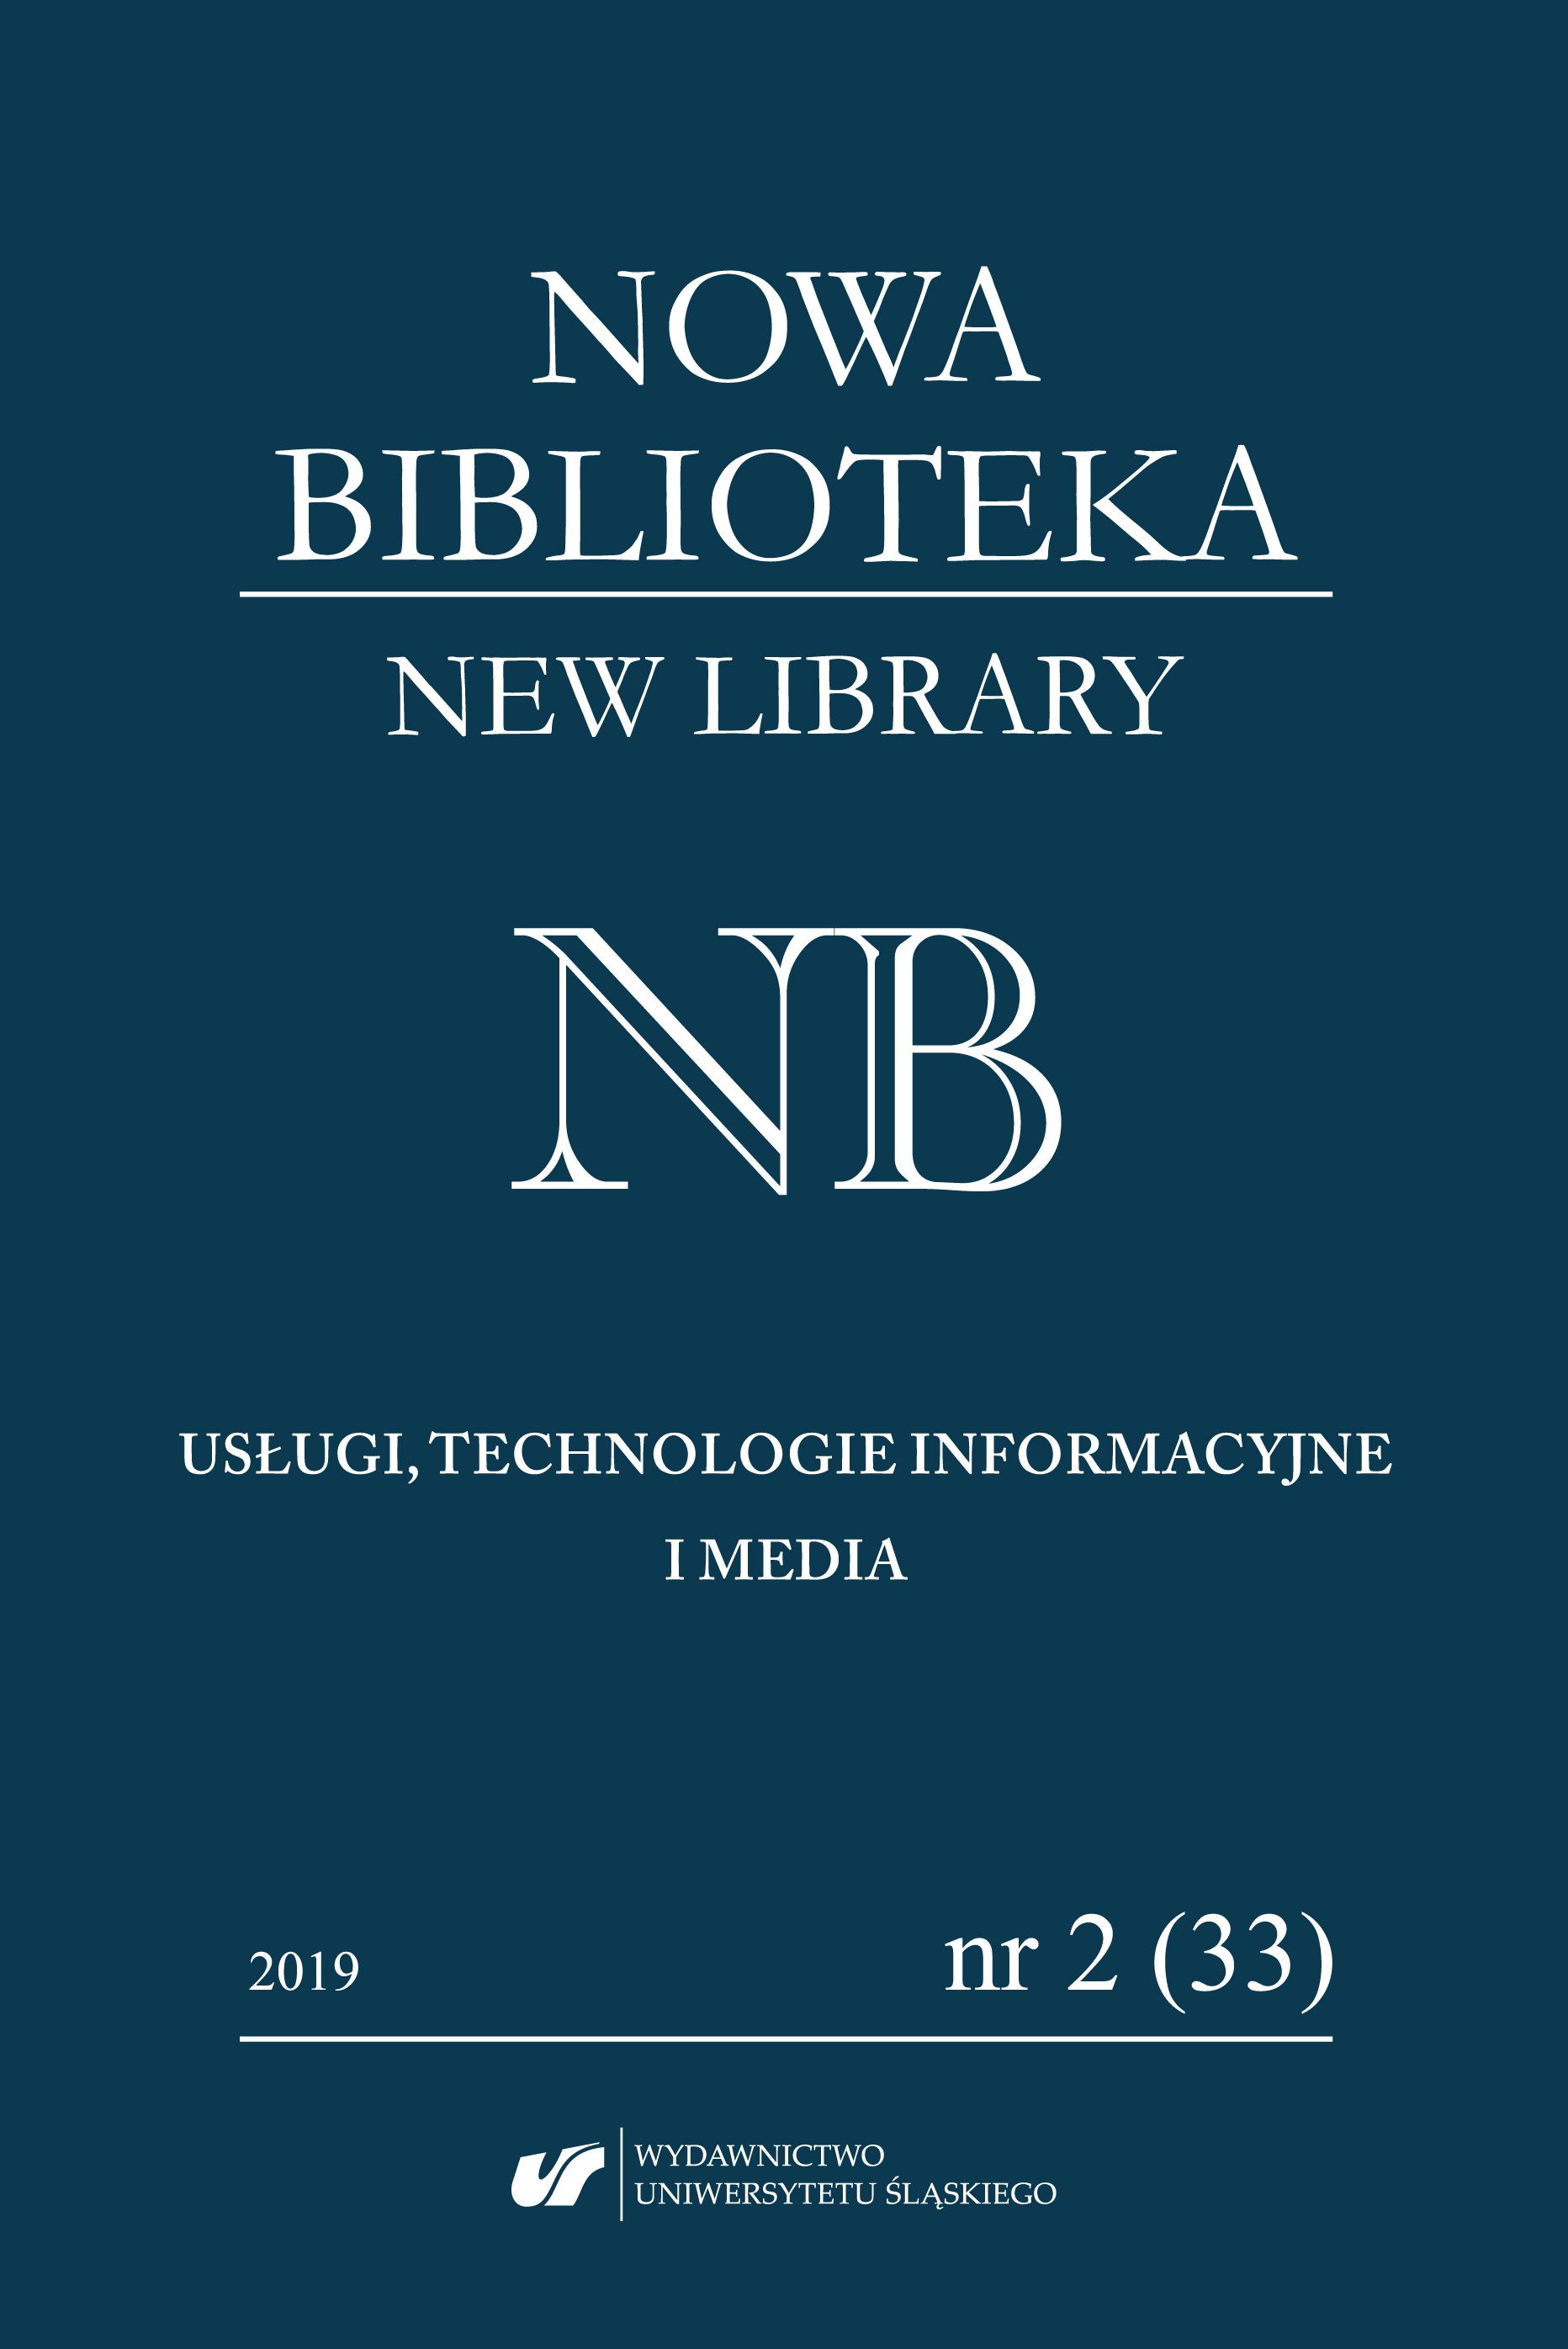 Bibliography of Publications of Scientific Staff of the University of Silesia – systemic and technical changes